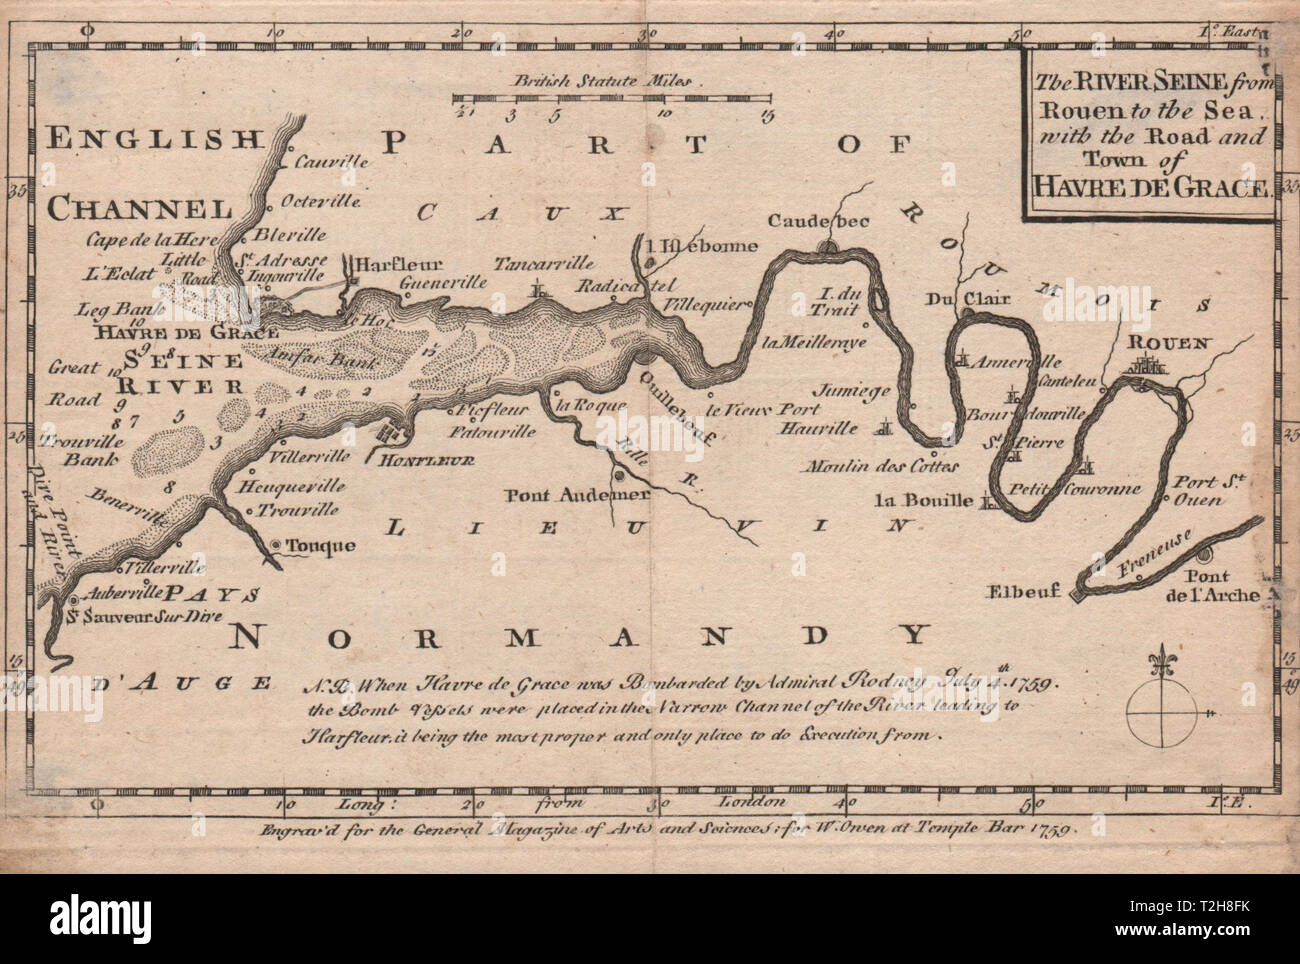 The River Seine from Rouen to the Sea, with… Havre de Grace. OWEN 1759 old map Stock Photo